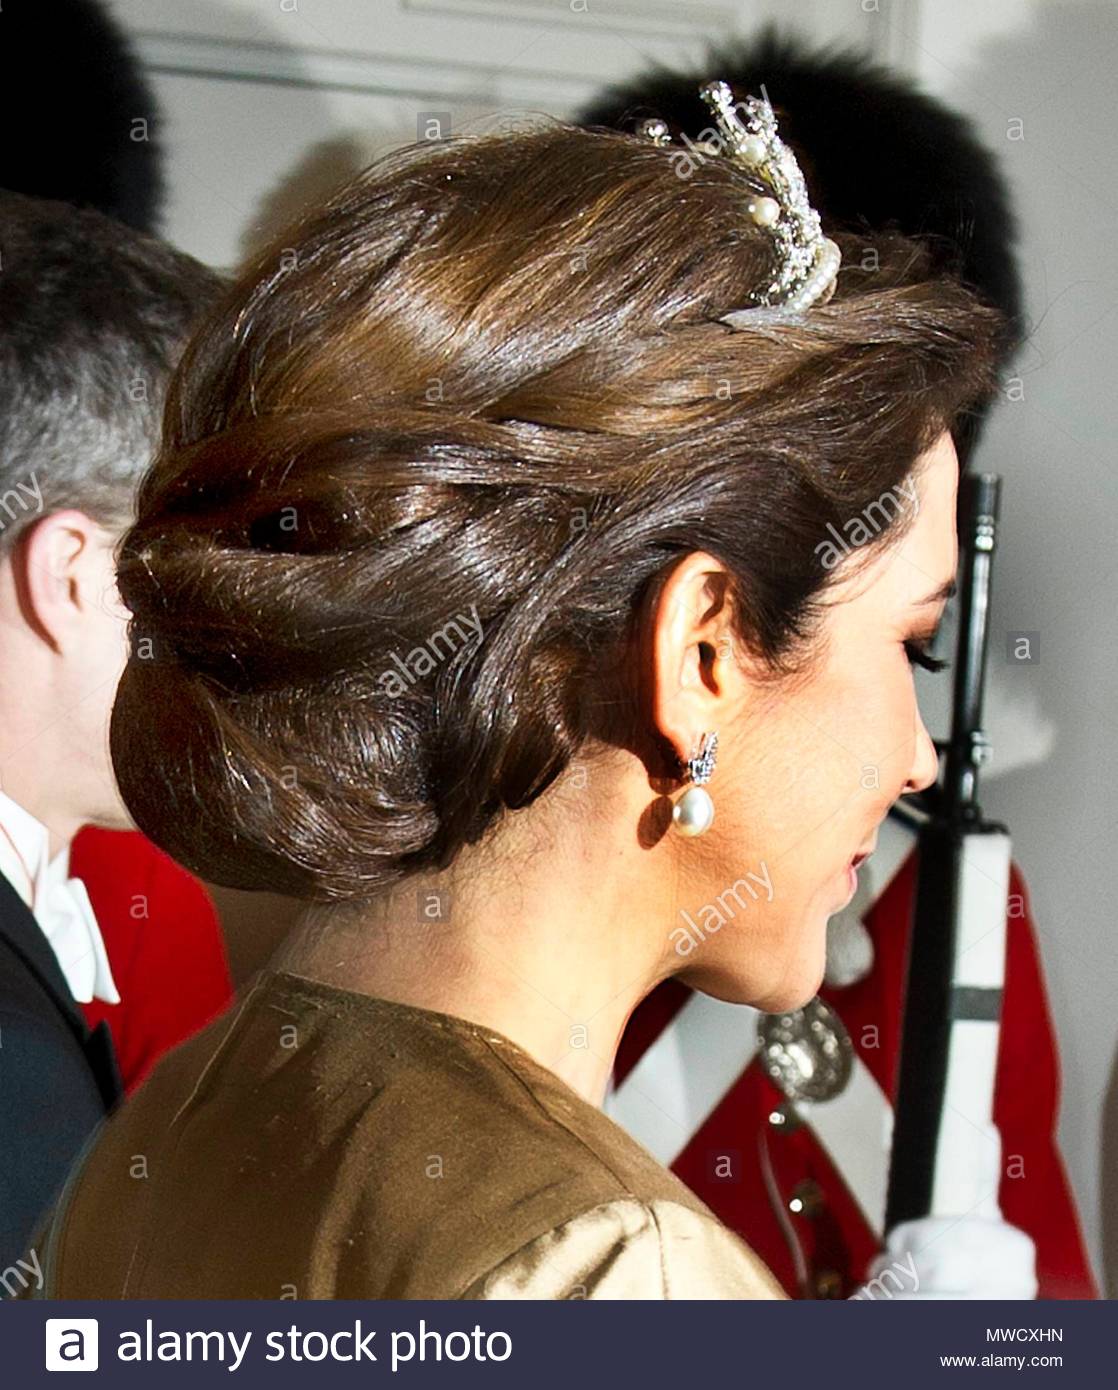 hrh-crown-princess-mary-in-connection-with-the-40th-anniversary-of-hm-the-queens-reign-the-queen-and-the-prince-consort-host-a-dinner-for-the-diplomatic-corps-at-christiansborg-in-copenhagen-also-in-attendance-were-hrh-crown-prince-frederik-hrh-crown-princess-mary-hrh-prince-joachim-and-hrh-princess-benedikte-code-03390hj-photo-hanne-juul-all-over-press-denmark-MWCXHN.jpg